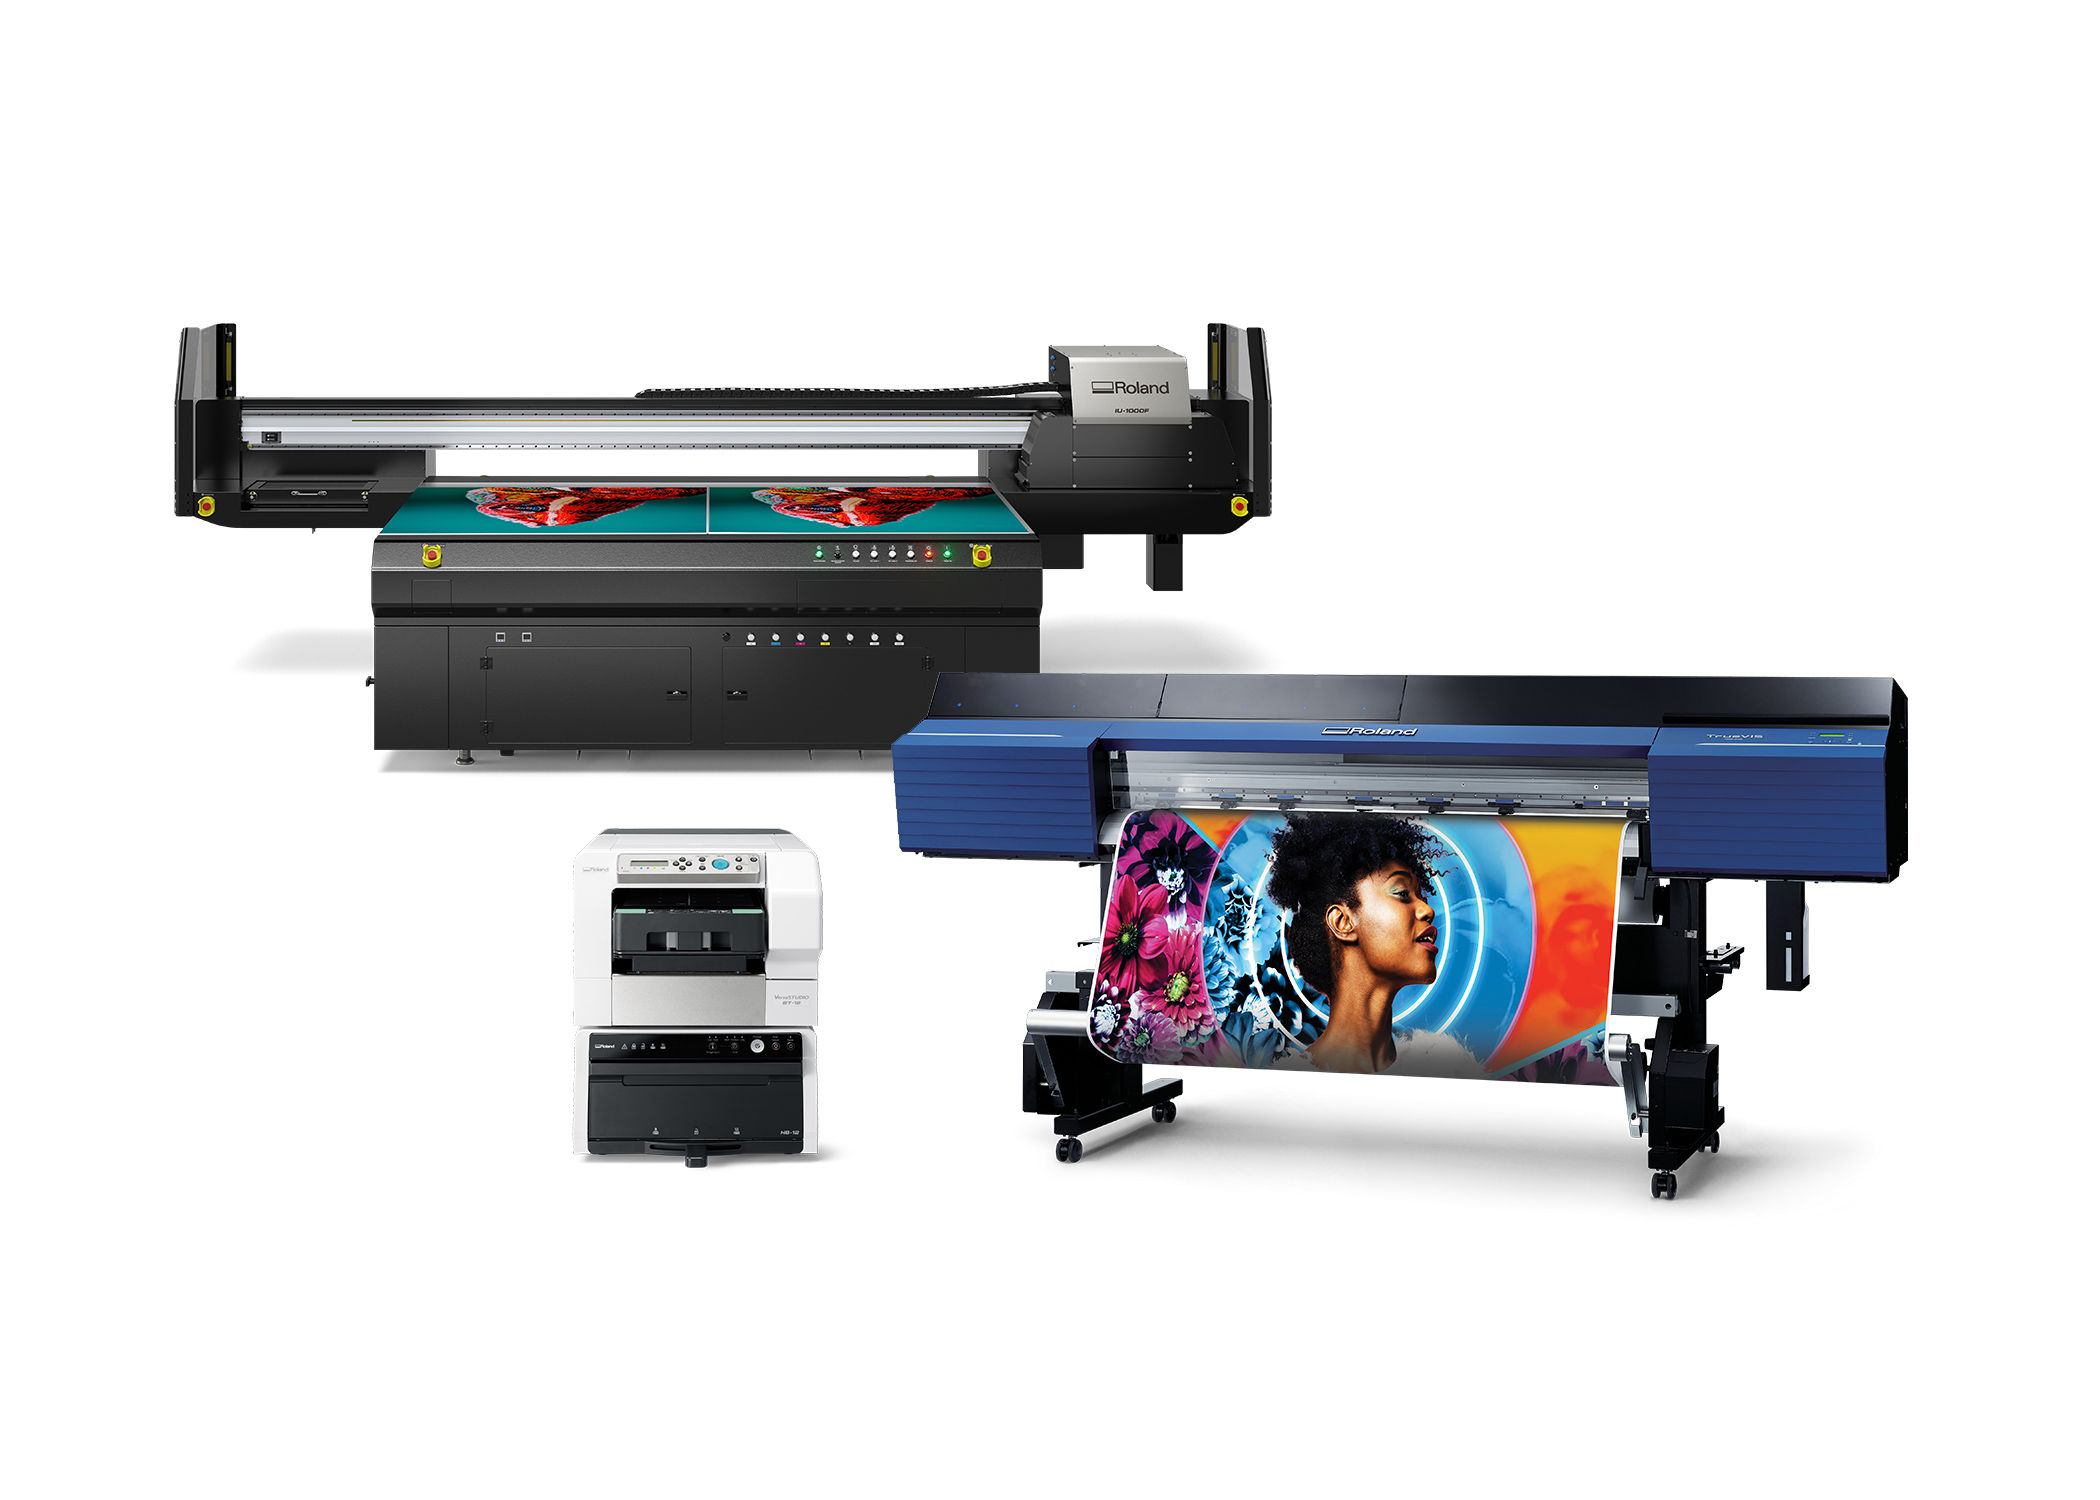 Roland DGA will be showcasing its advanced devices for eco-solvent, UV, and direct-to-garment printing at the upcoming PRINTING United Digital Experience.